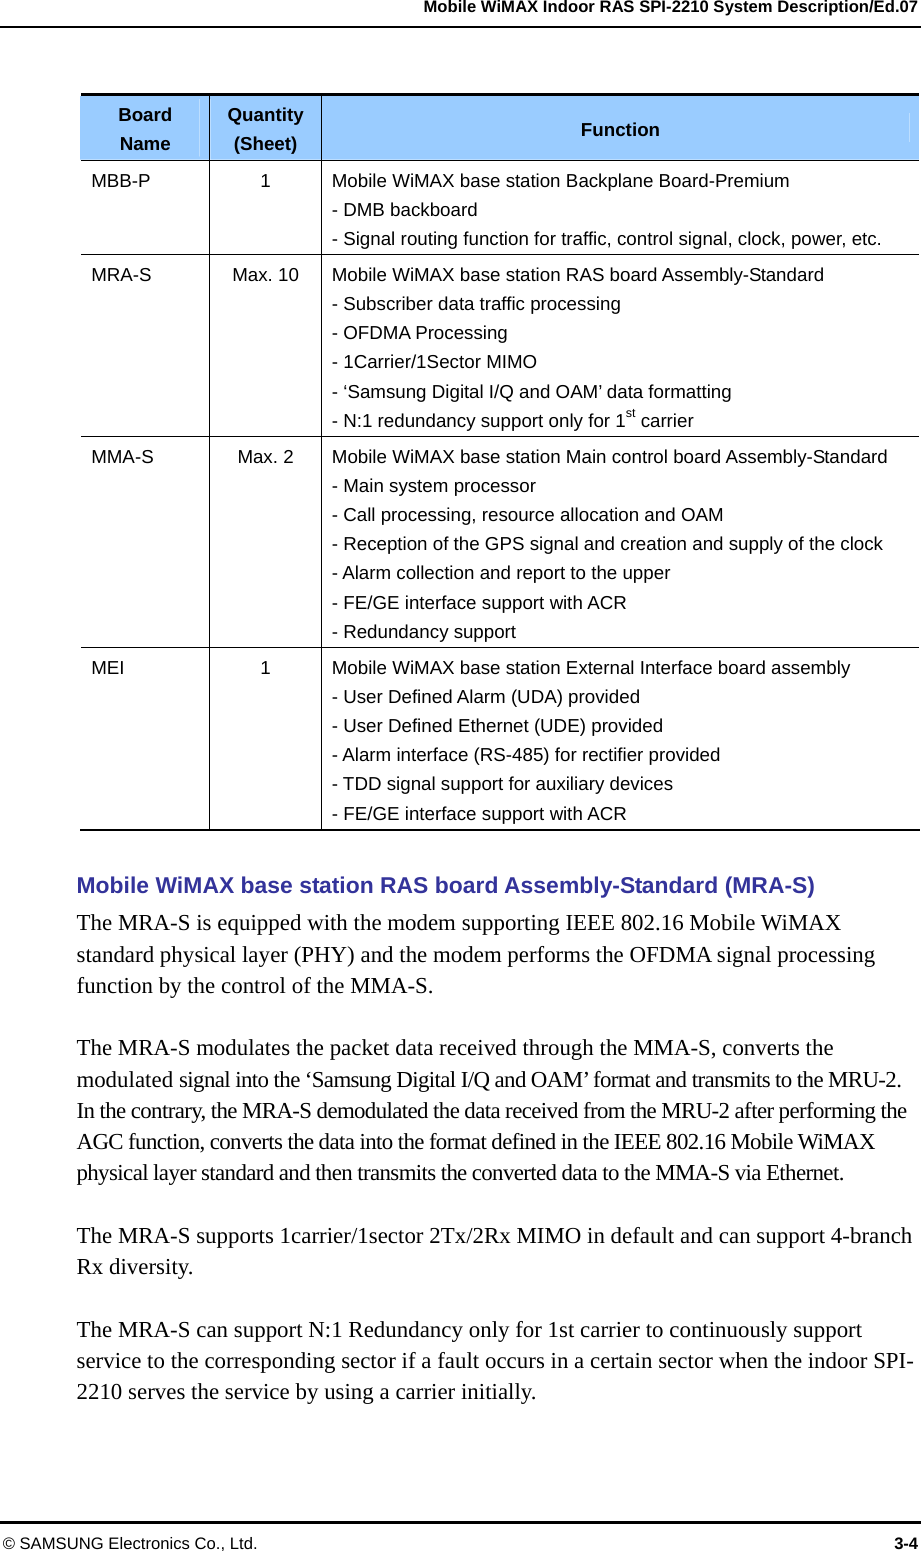   Mobile WiMAX Indoor RAS SPI-2210 System Description/Ed.07 © SAMSUNG Electronics Co., Ltd.  3-4  Board Name Quantity (Sheet) Function MBB-P 1 Mobile WiMAX base station Backplane Board-Premium - DMB backboard - Signal routing function for traffic, control signal, clock, power, etc. MRA-S Max. 10 Mobile WiMAX base station RAS board Assembly-Standard - Subscriber data traffic processing - OFDMA Processing - 1Carrier/1Sector MIMO   - ‘Samsung Digital I/Q and OAM’ data formatting - N:1 redundancy support only for 1st carrier MMA-S Max. 2  Mobile WiMAX base station Main control board Assembly-Standard - Main system processor - Call processing, resource allocation and OAM - Reception of the GPS signal and creation and supply of the clock - Alarm collection and report to the upper - FE/GE interface support with ACR - Redundancy support MEI 1  Mobile WiMAX base station External Interface board assembly - User Defined Alarm (UDA) provided - User Defined Ethernet (UDE) provided - Alarm interface (RS-485) for rectifier provided - TDD signal support for auxiliary devices - FE/GE interface support with ACR  Mobile WiMAX base station RAS board Assembly-Standard (MRA-S) The MRA-S is equipped with the modem supporting IEEE 802.16 Mobile WiMAX standard physical layer (PHY) and the modem performs the OFDMA signal processing function by the control of the MMA-S.  The MRA-S modulates the packet data received through the MMA-S, converts the modulated signal into the ‘Samsung Digital I/Q and OAM’ format and transmits to the MRU-2. In the contrary, the MRA-S demodulated the data received from the MRU-2 after performing the AGC function, converts the data into the format defined in the IEEE 802.16 Mobile WiMAX physical layer standard and then transmits the converted data to the MMA-S via Ethernet.  The MRA-S supports 1carrier/1sector 2Tx/2Rx MIMO in default and can support 4-branch Rx diversity.  The MRA-S can support N:1 Redundancy only for 1st carrier to continuously support service to the corresponding sector if a fault occurs in a certain sector when the indoor SPI-2210 serves the service by using a carrier initially.  